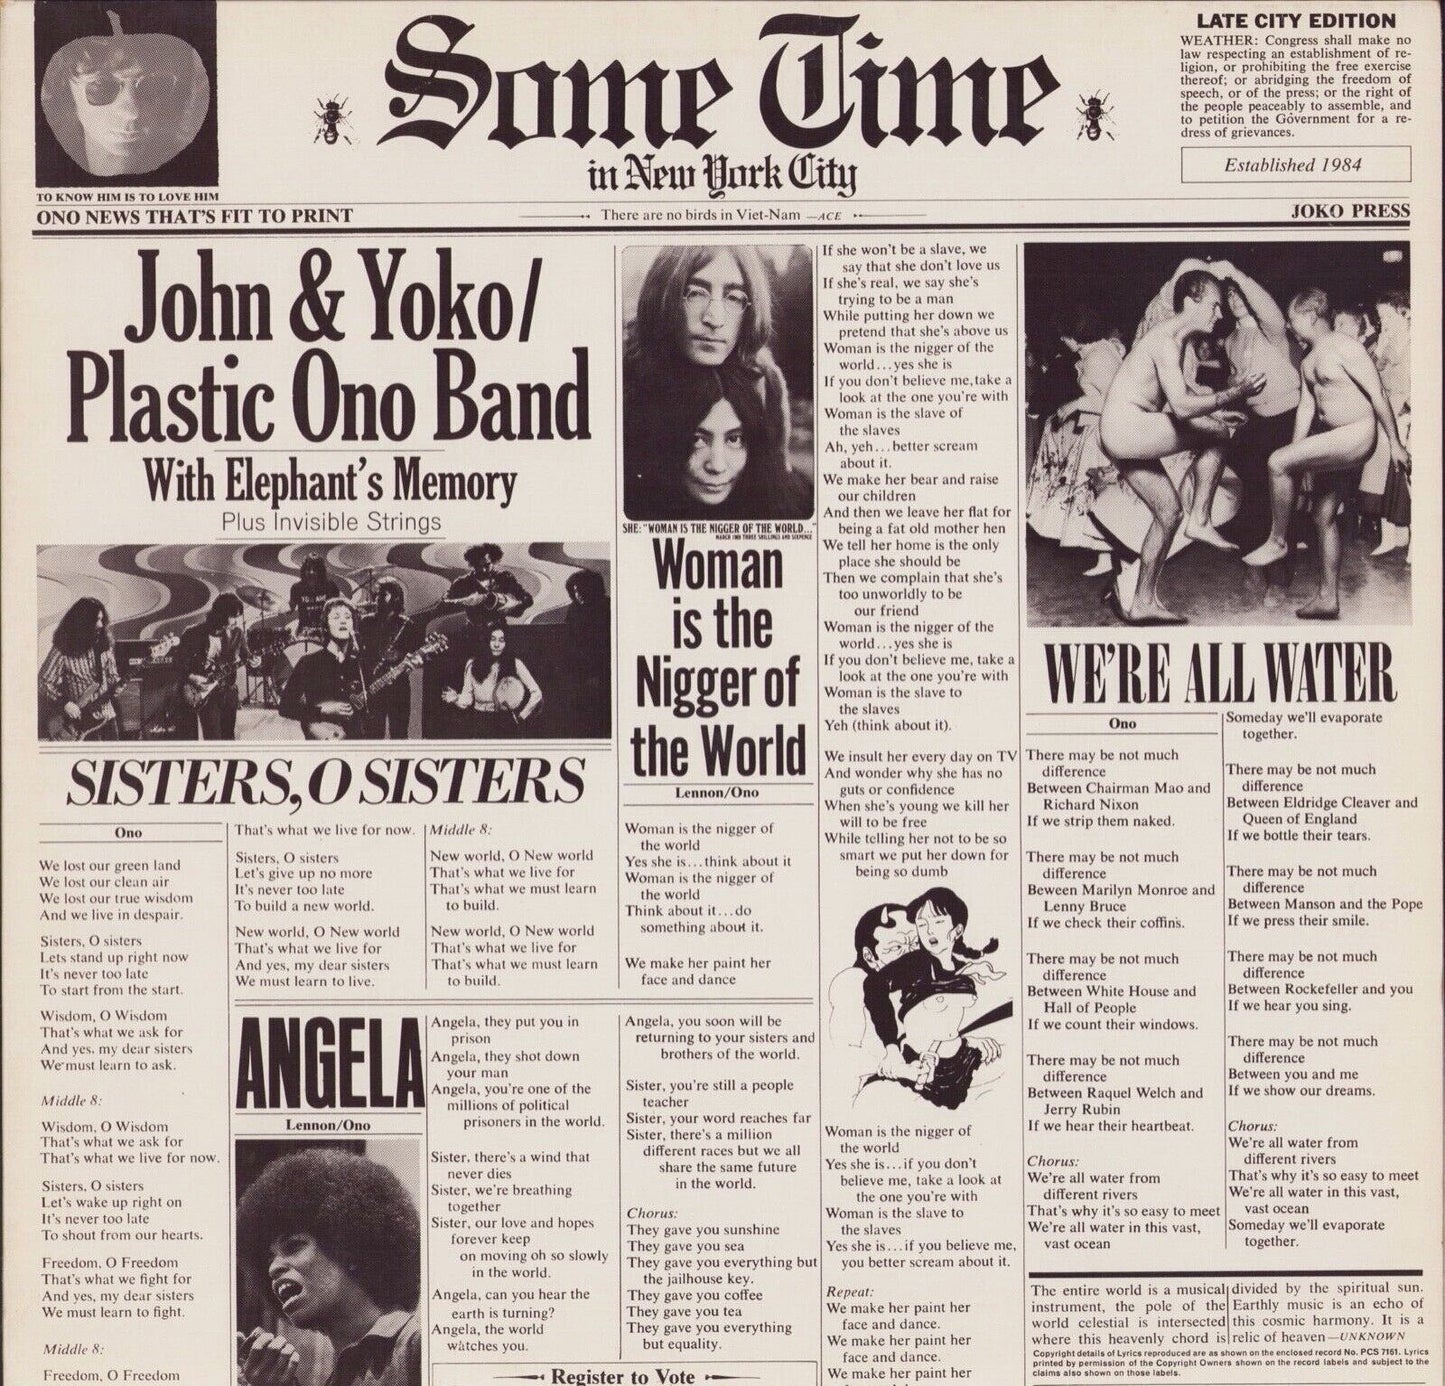 John & Yoko / Plastic Ono Band With Elephant's Memory And Invisible Strings - Some Time In New York City Vinyl 2LP